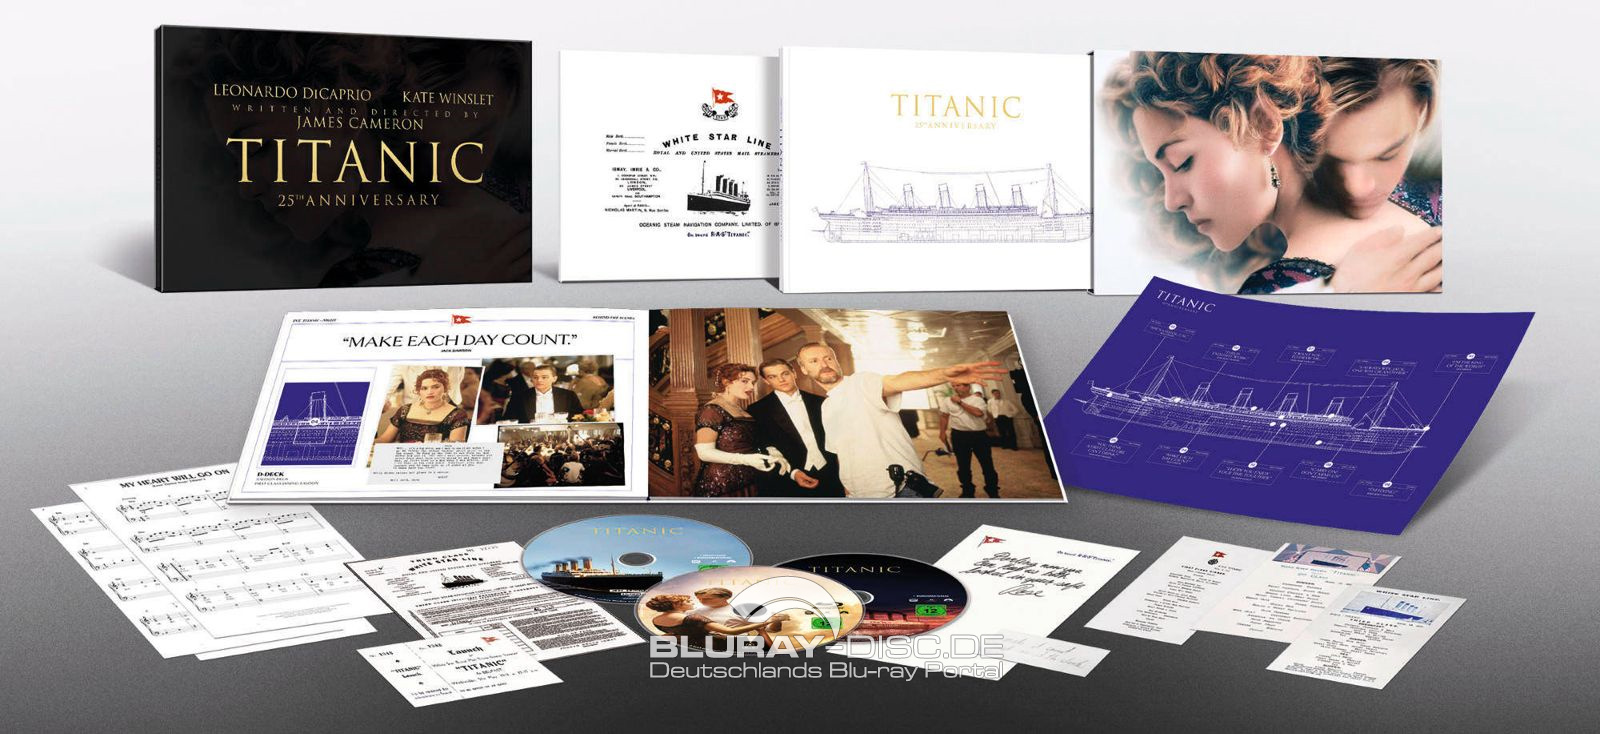 Titanic_1997_Galerie_Limited_Collectors_Edition.jpg